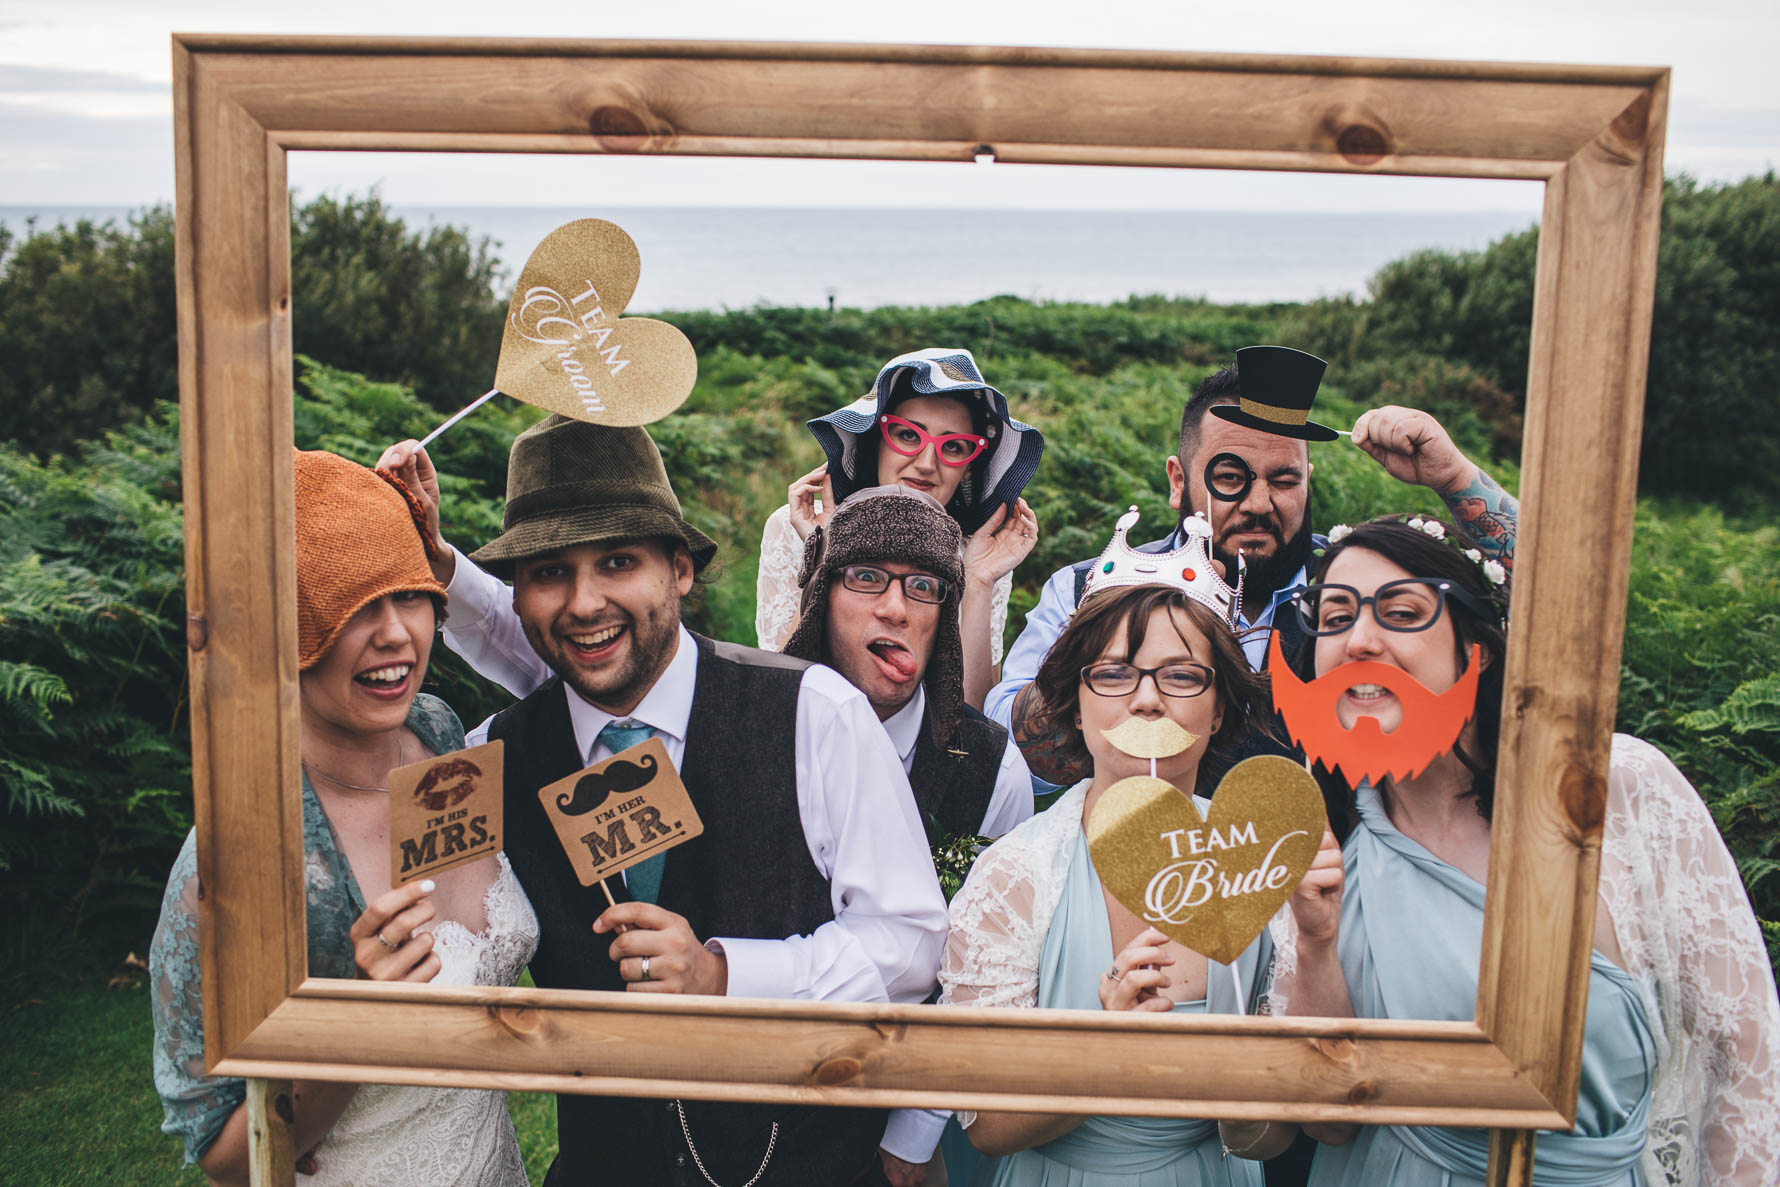 Wedding guests with various glasses and props stood behind a large picture frame pulling faces and smiling